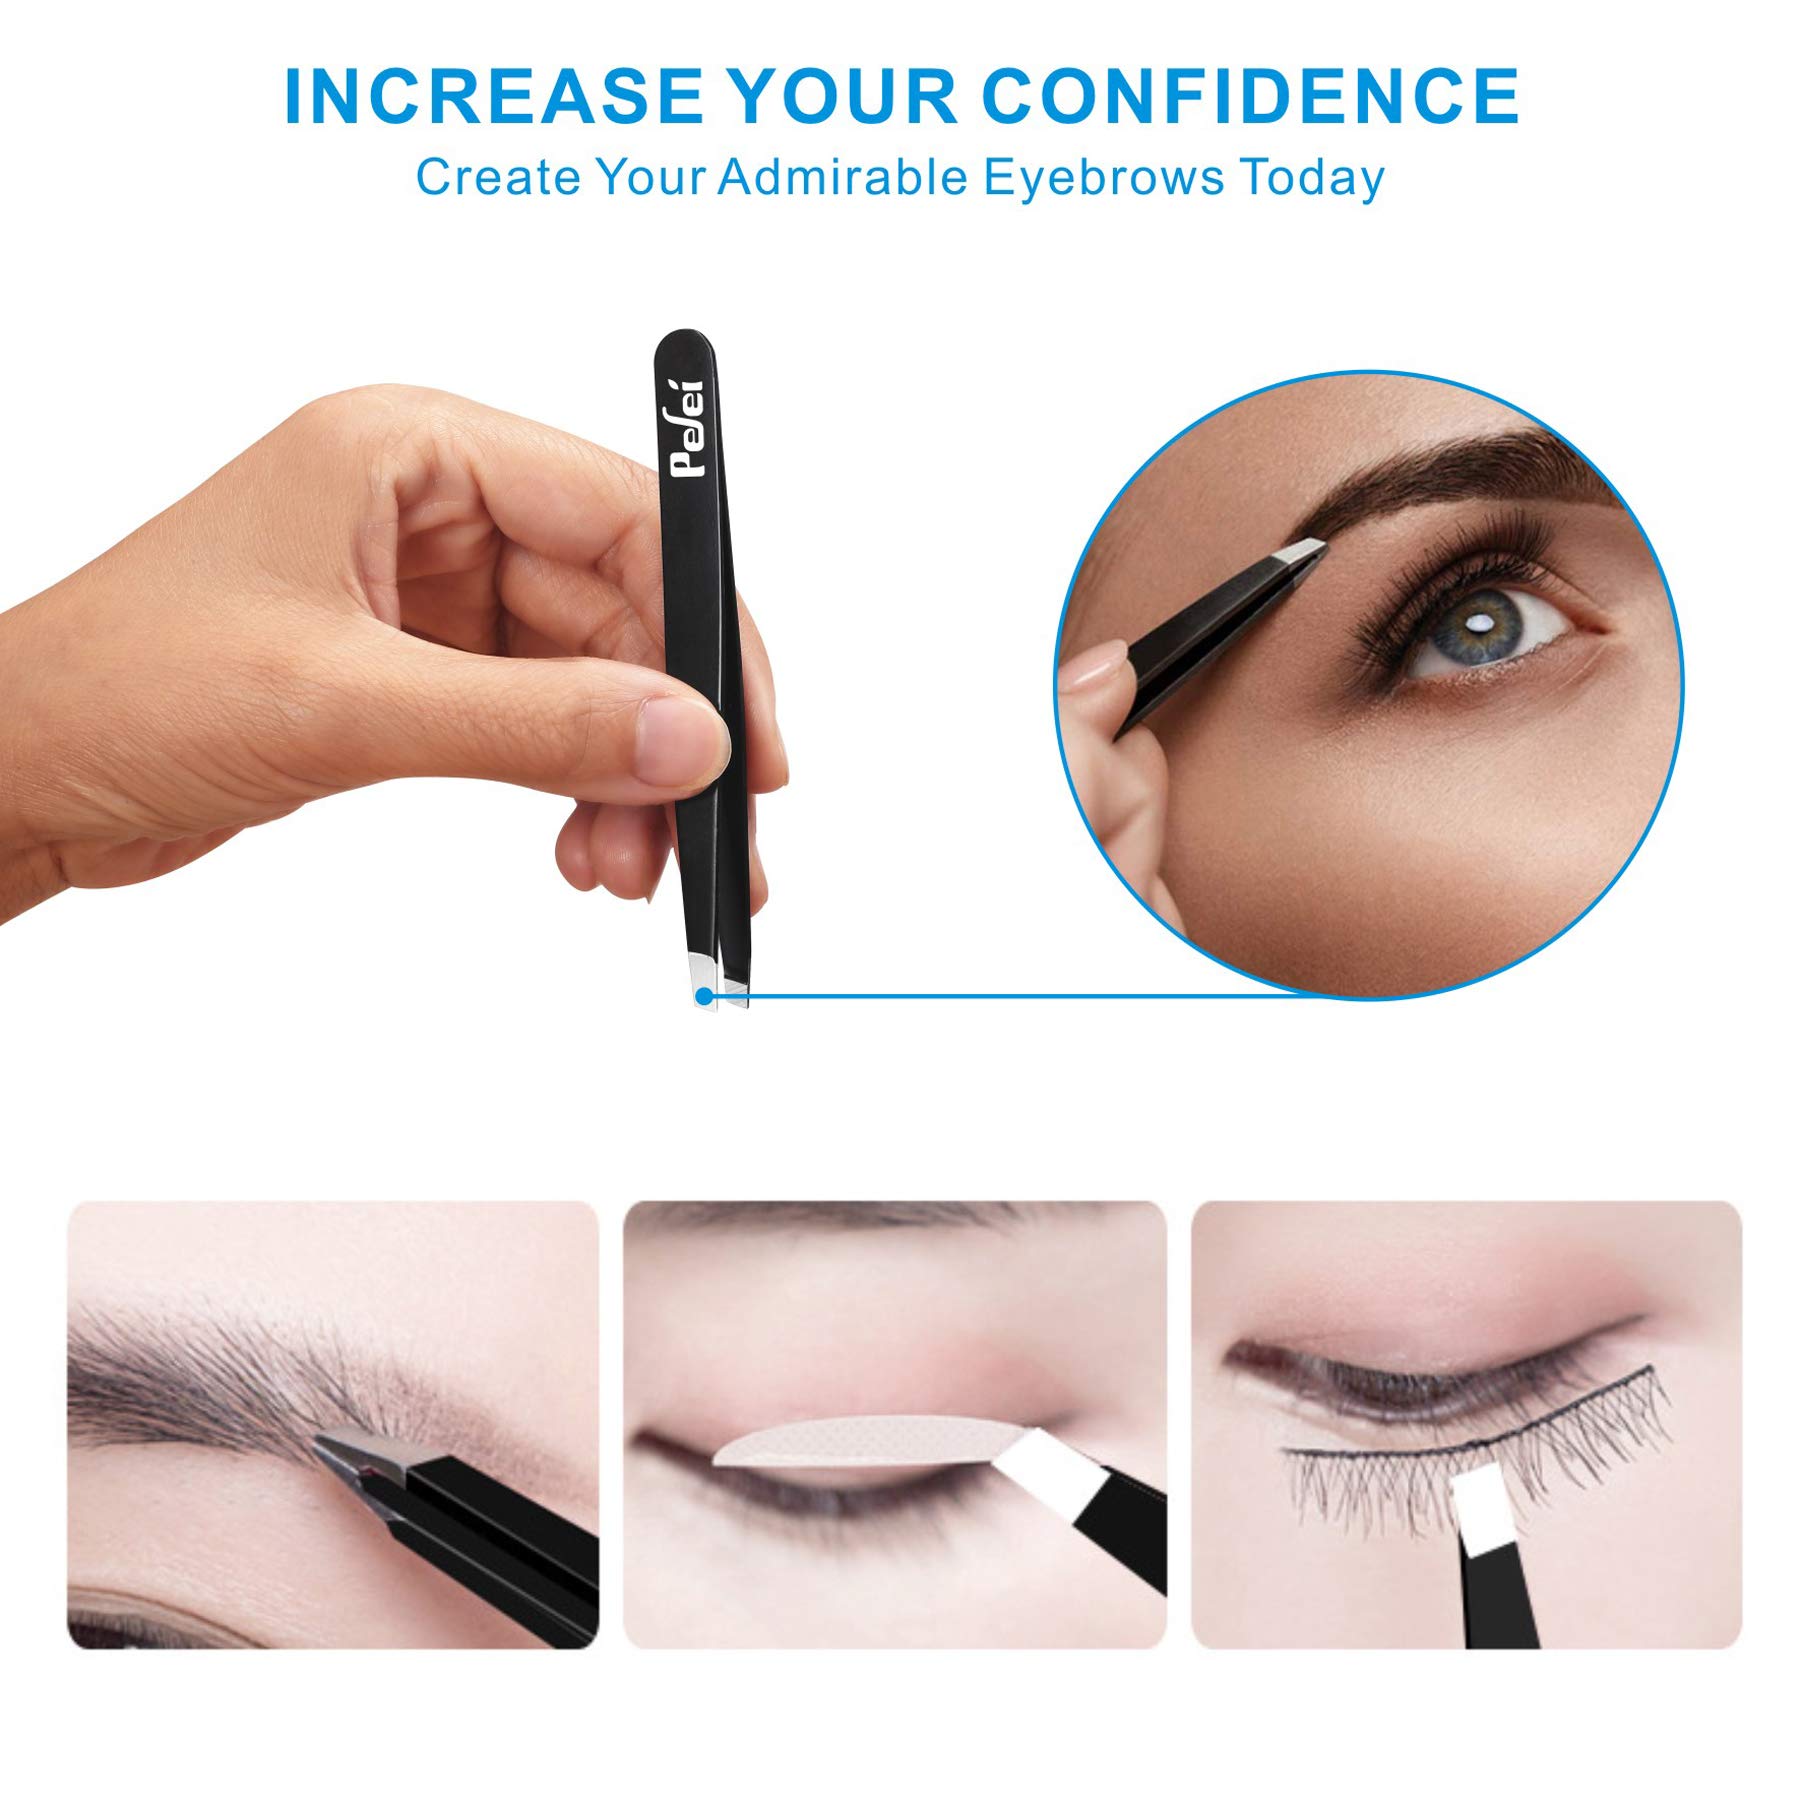 Pefei Tweezers Set - Professional Stainless Steel Tweezers for Eyebrows - great Precision for Facial Hair, Splinter and Ingrown 